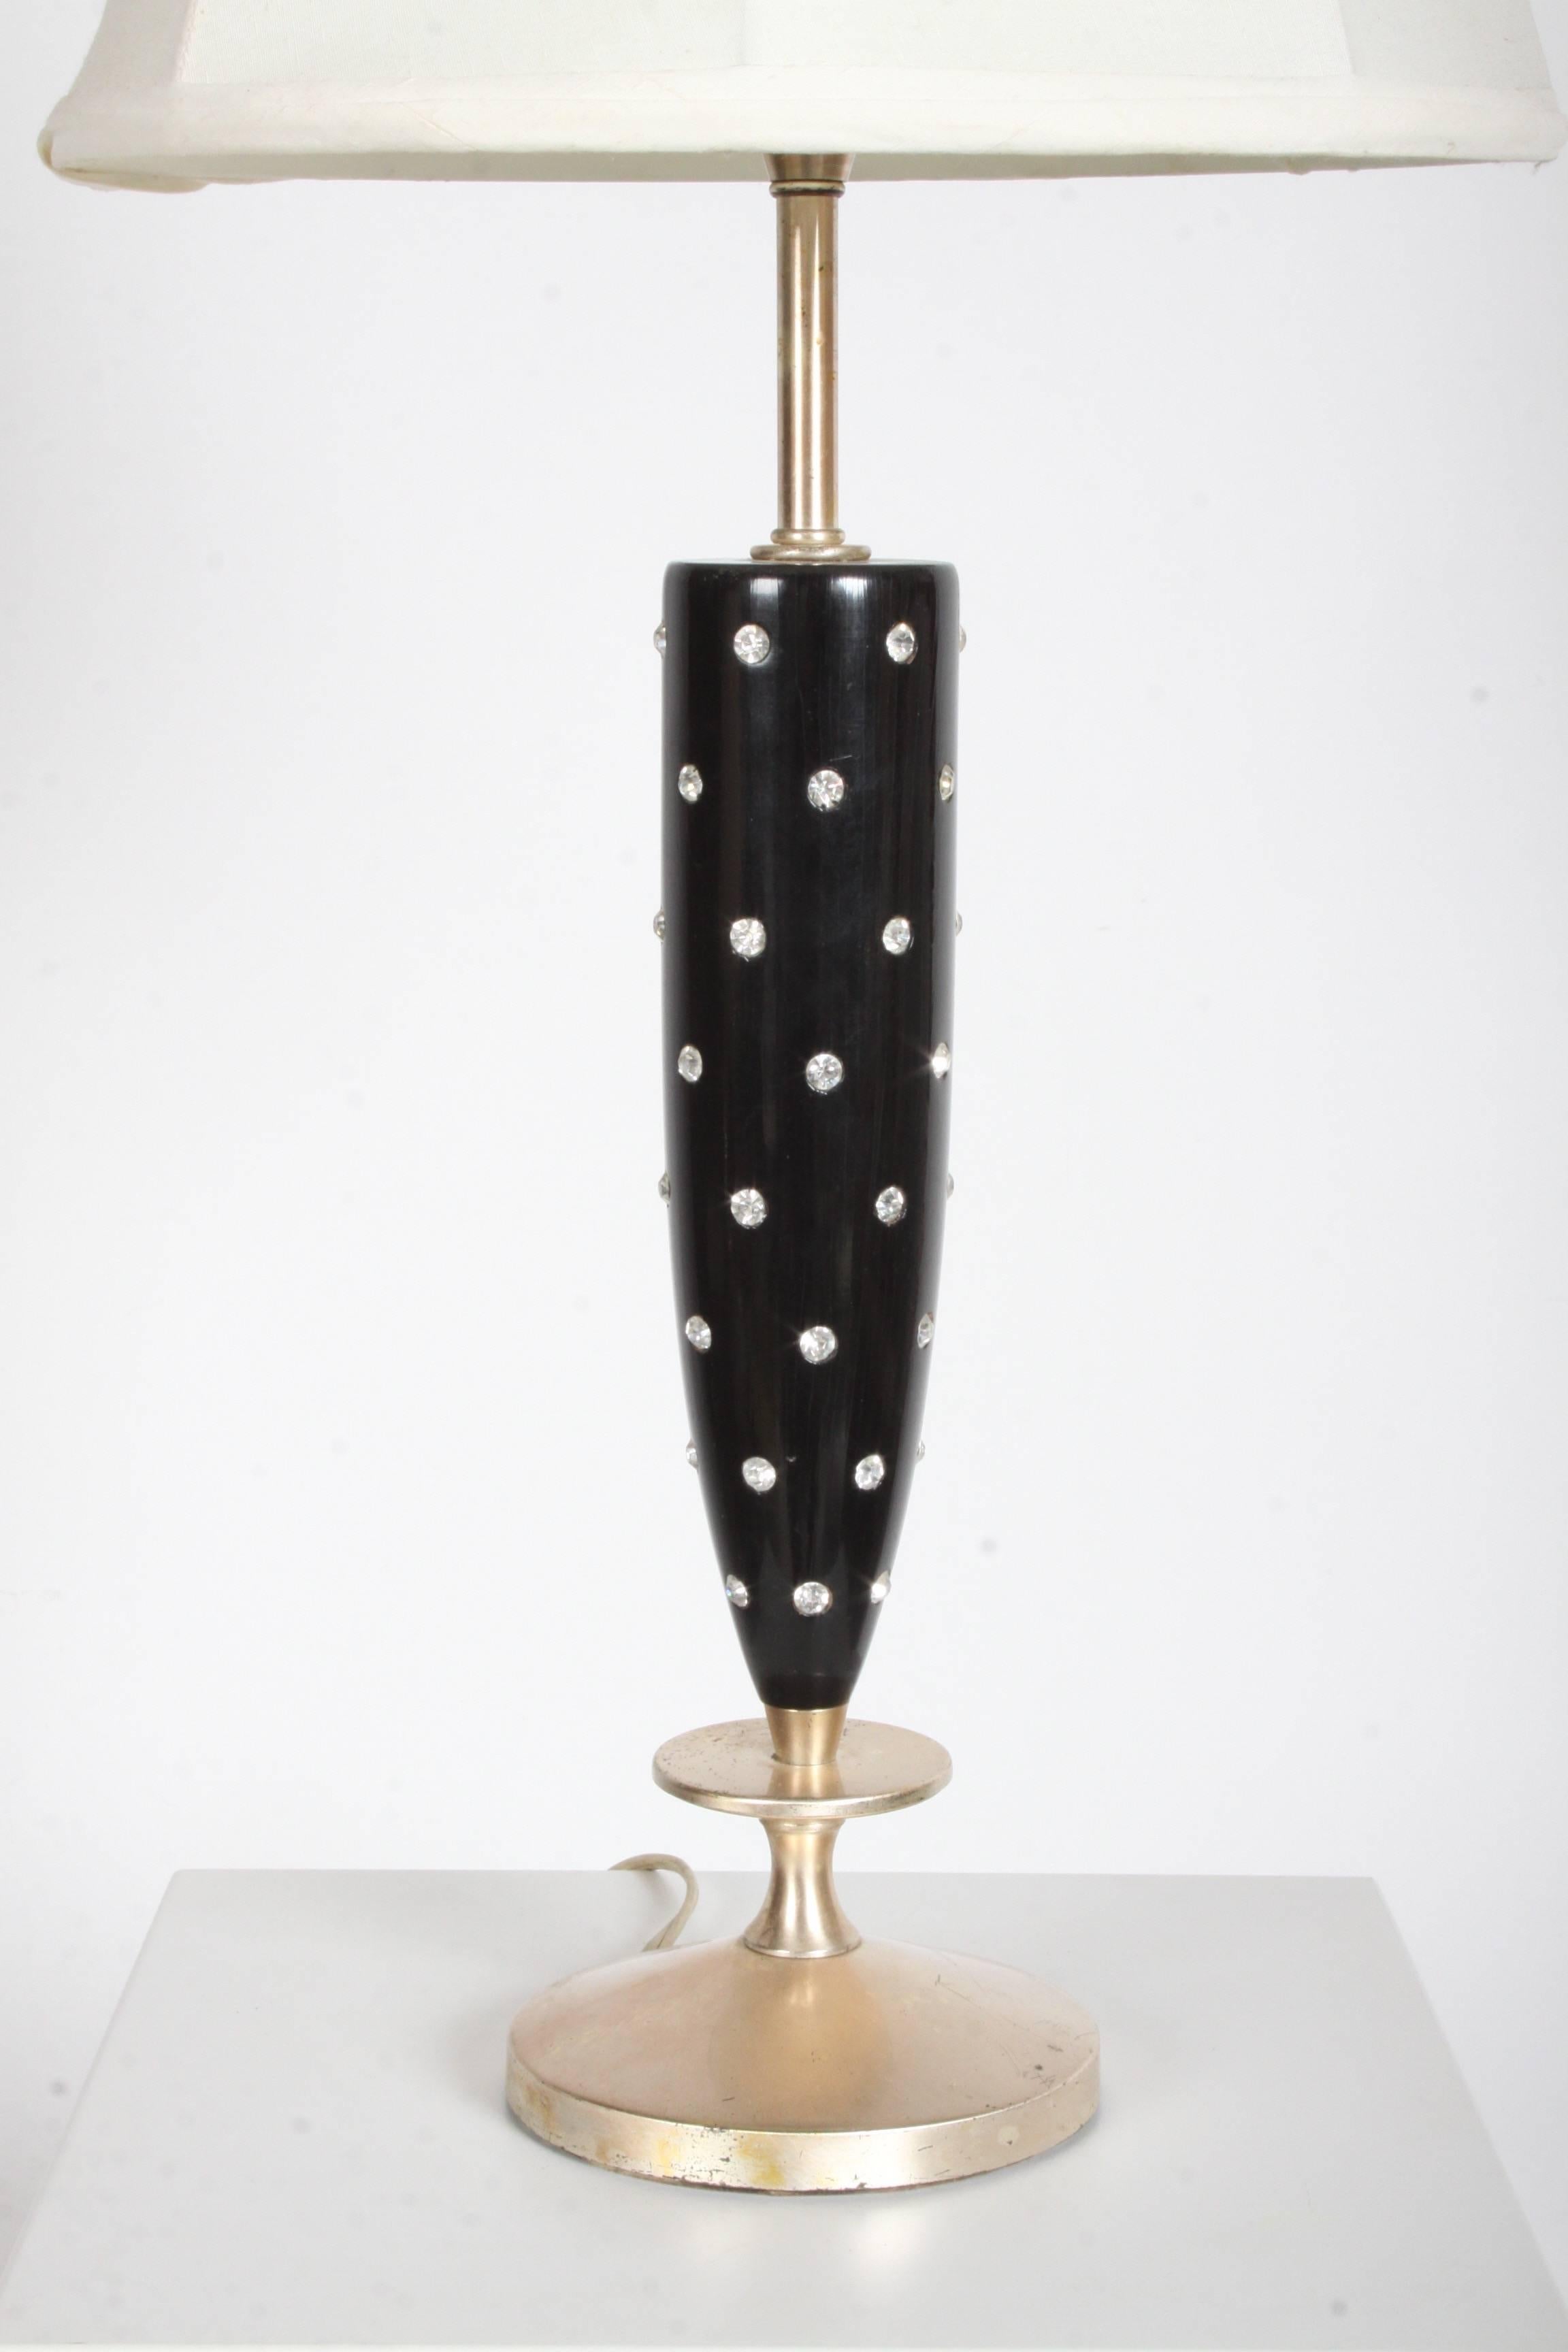 Attributed to Tommi Parzinger Rhinestone studded lamp for Rembrandt. Black lacquer with embedded rhinestones and silver plated base. Vintage shade not included. Mid-Century Modern. Shade shown is 12